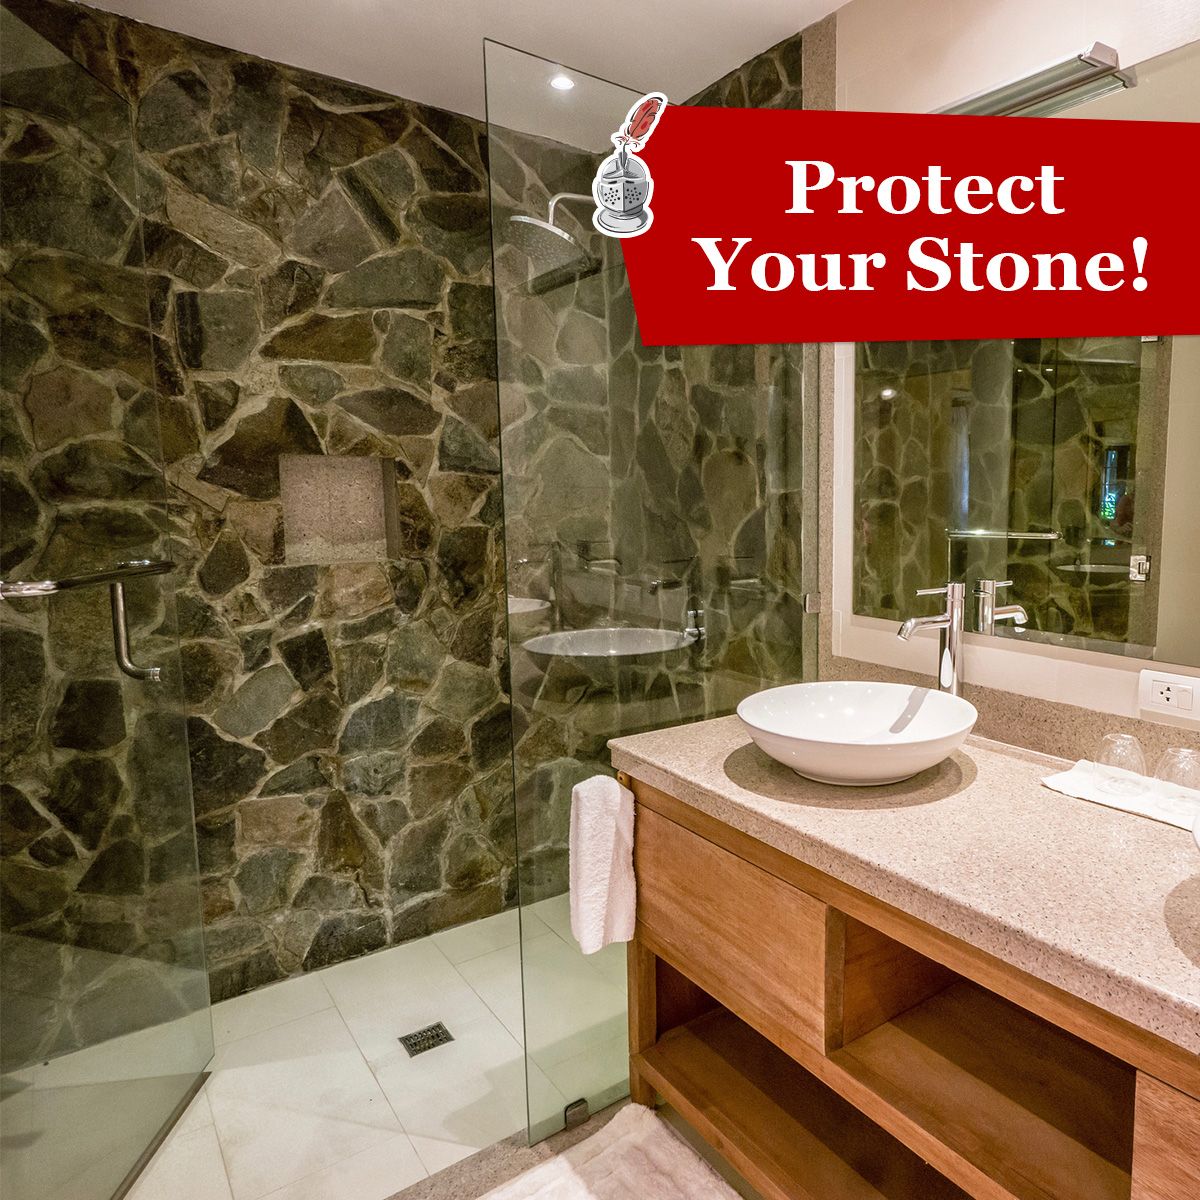 Protect Your Stone!